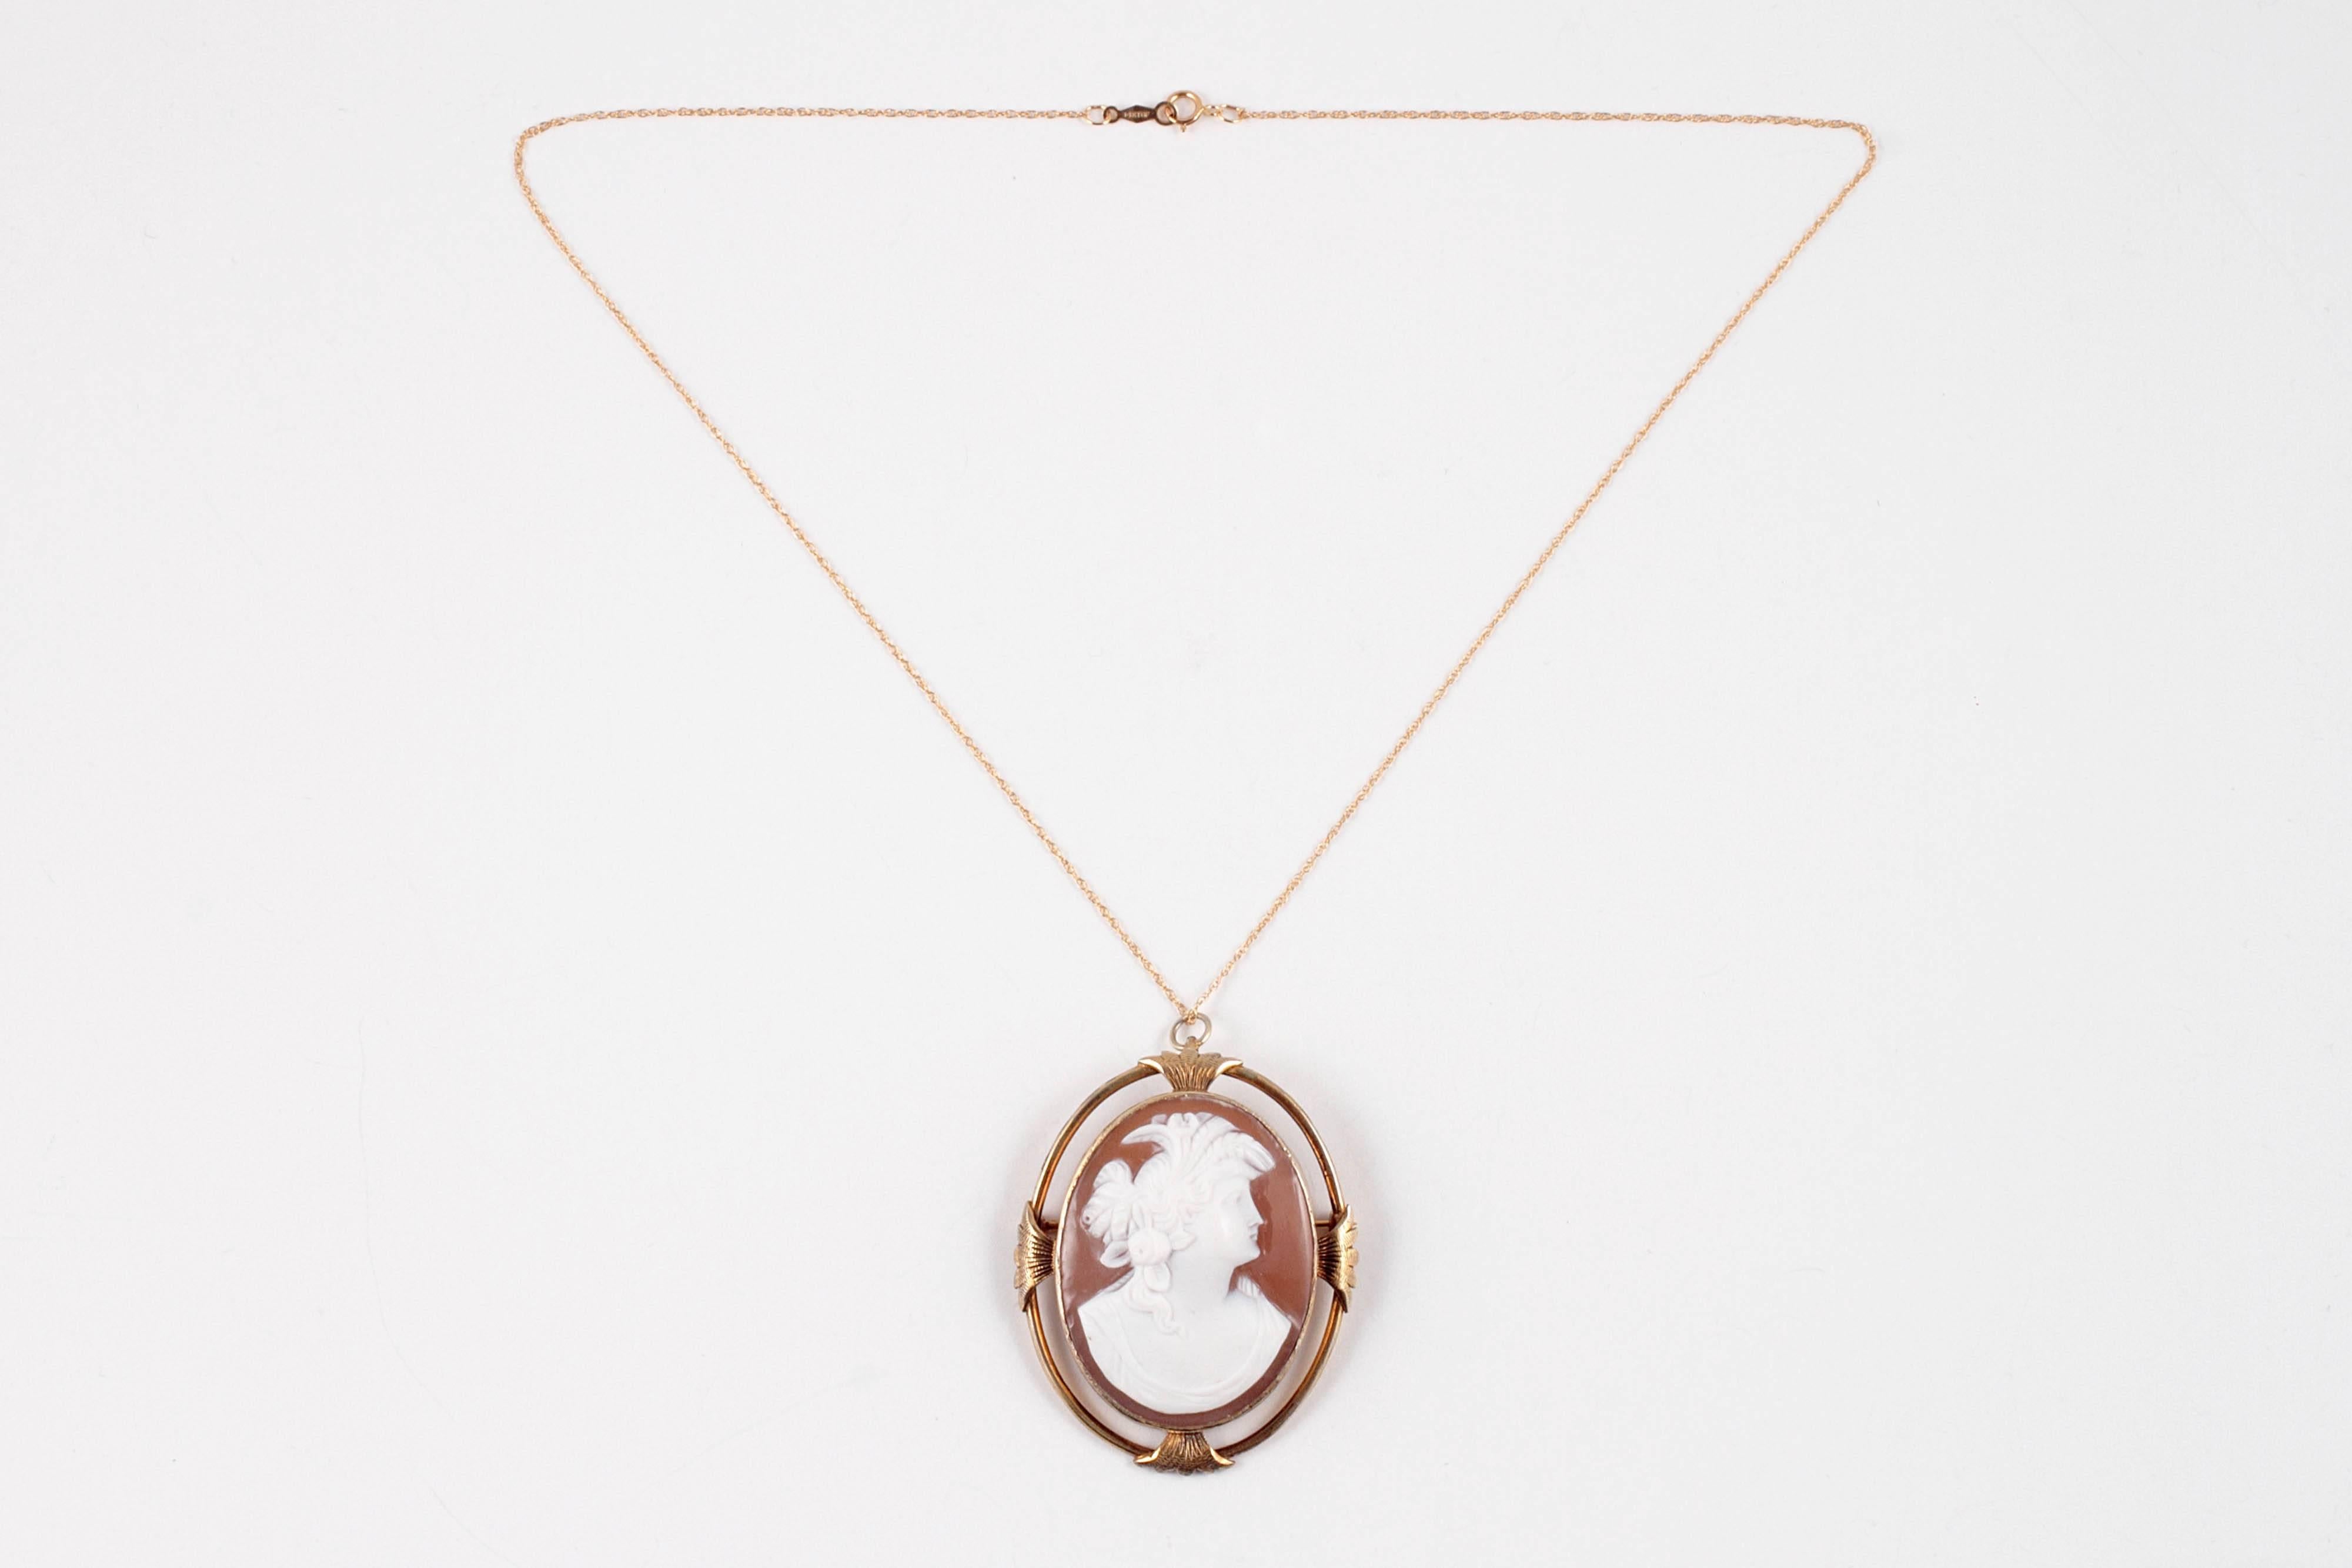 Victorian gold filled shell cameo pendant on 18 inch gold filled chain.